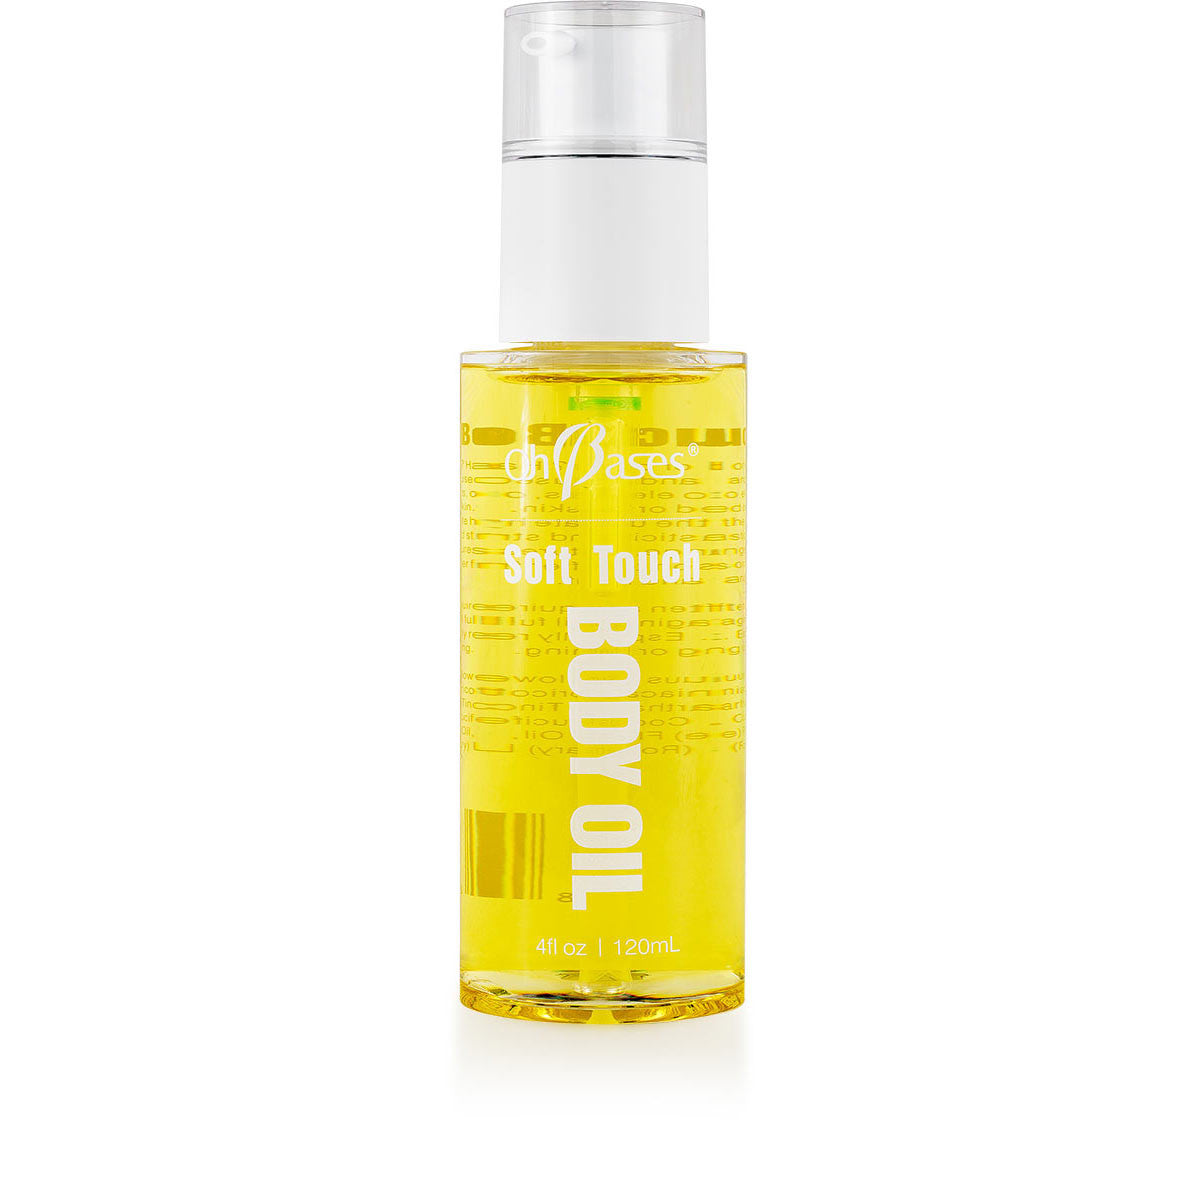 Soft Touch Body Oil - OhBases